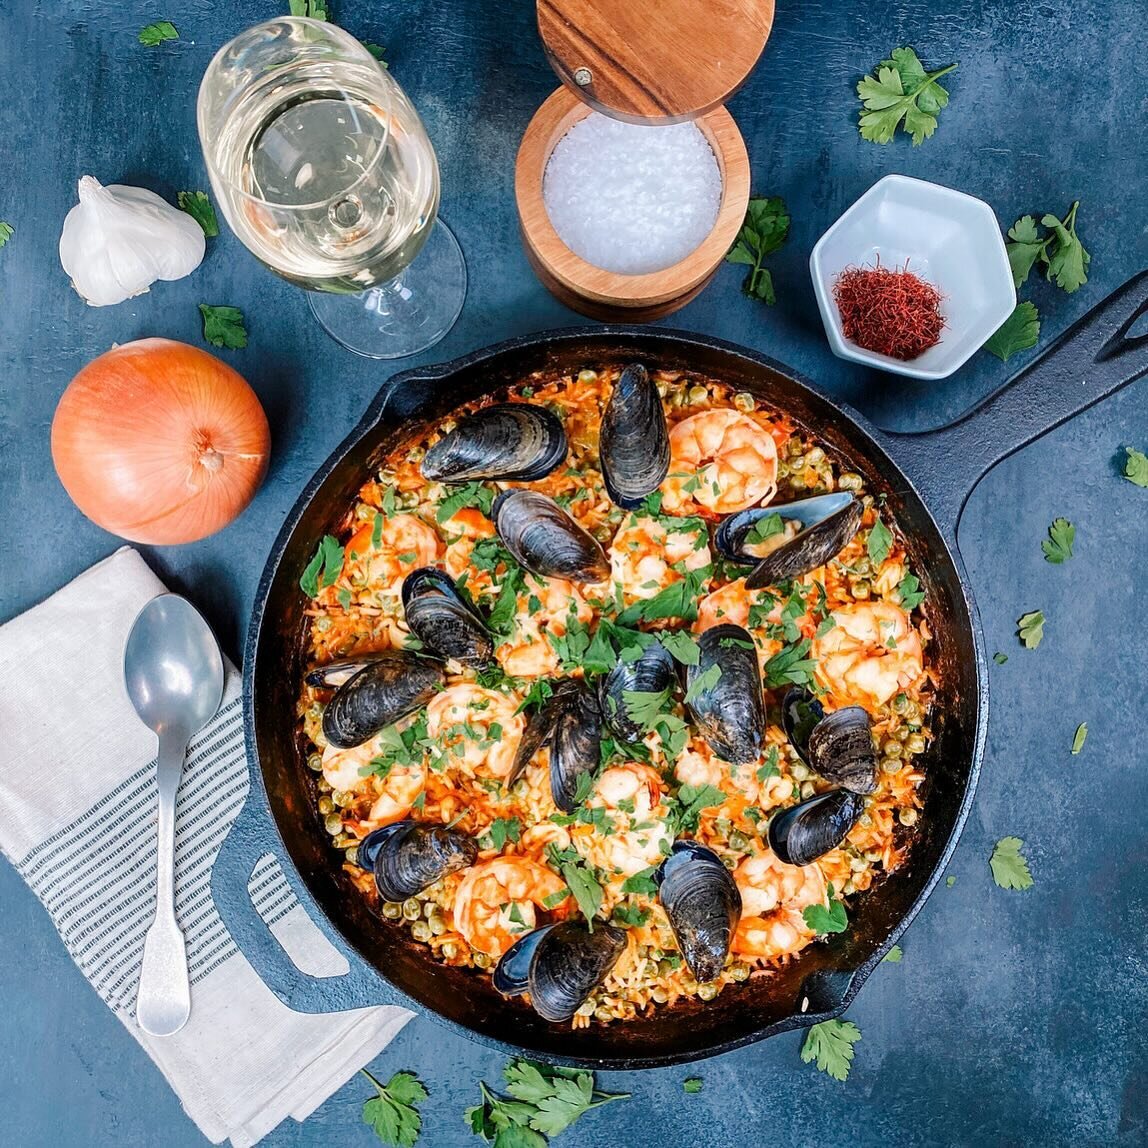 It&rsquo;s #PaellaDay which is one of my favorite dishes to make! 

Paella is a Spanish rice dish that may contain a variety of seafood and meat, although there are many variations and this one is focused on shellfish and uses rice. I have a deliciou